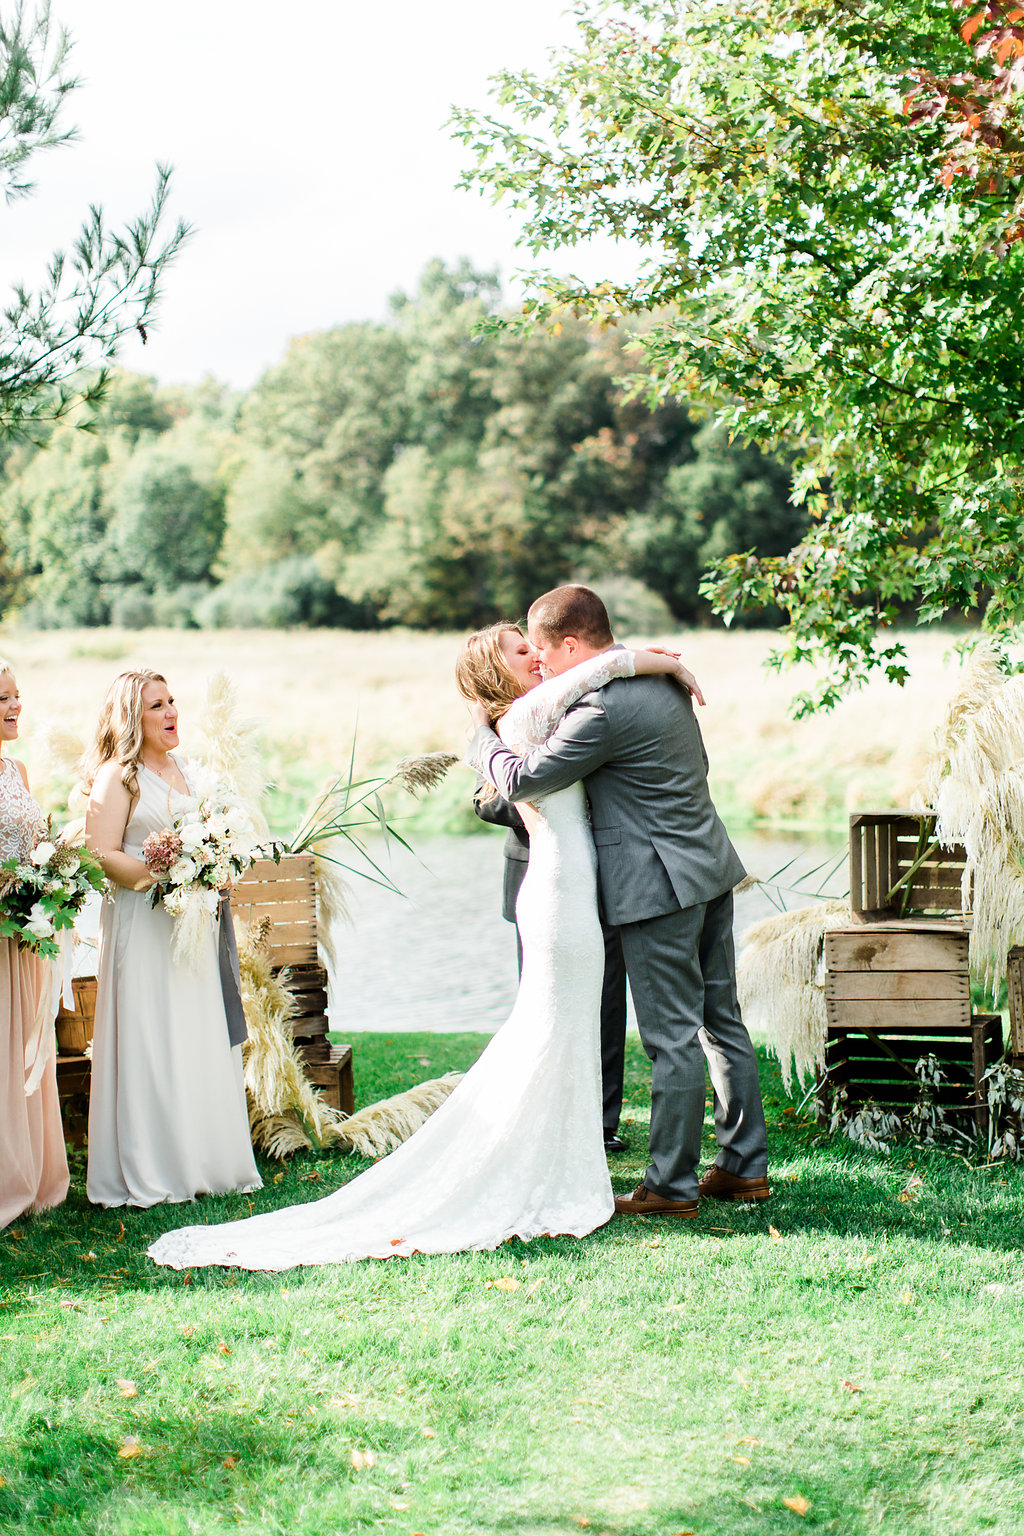 Fall Wedding Ceremony | The Day's Design | Ashley Slater Photography